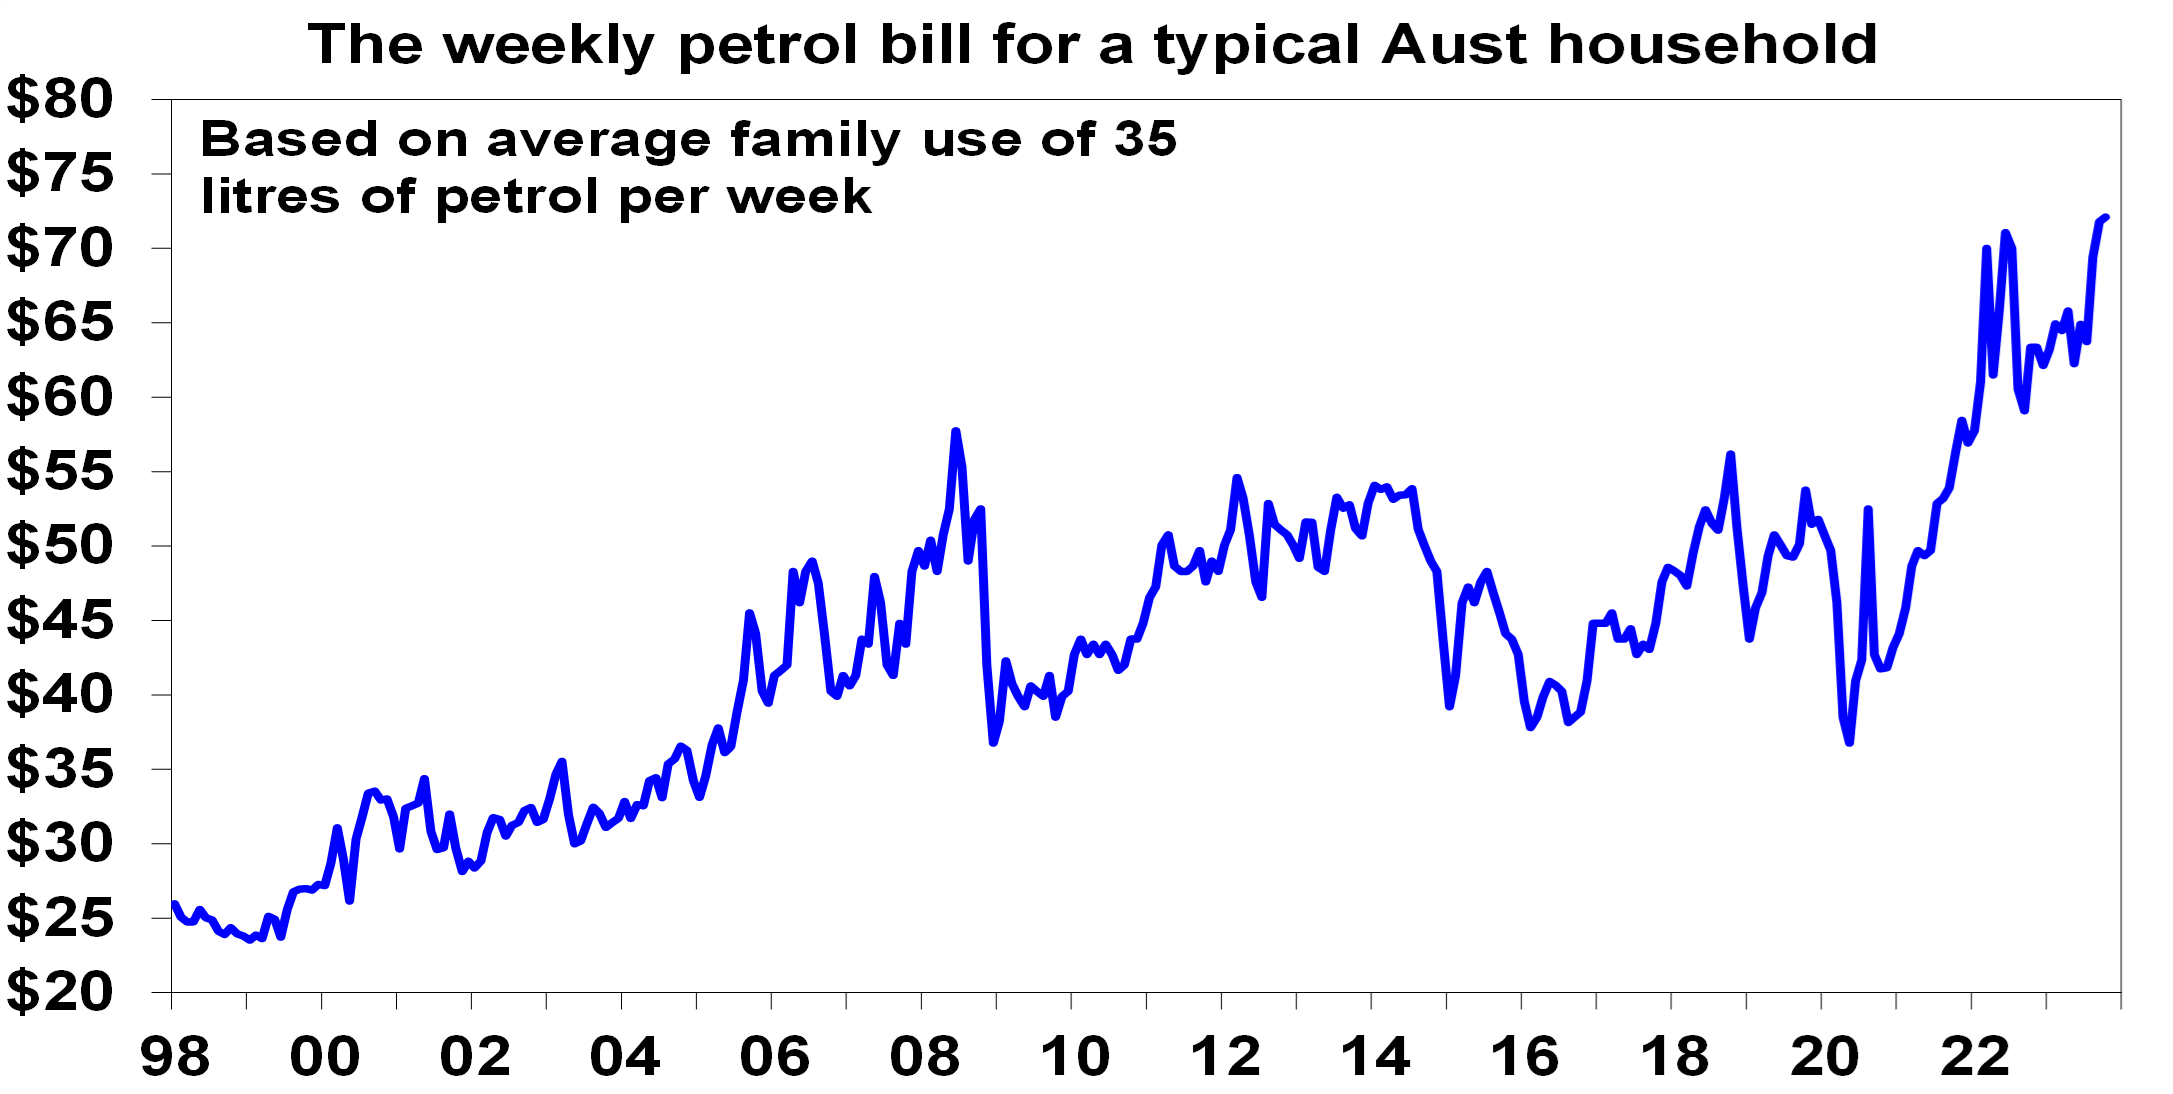 The weekly petrol bill for a typical Aust household